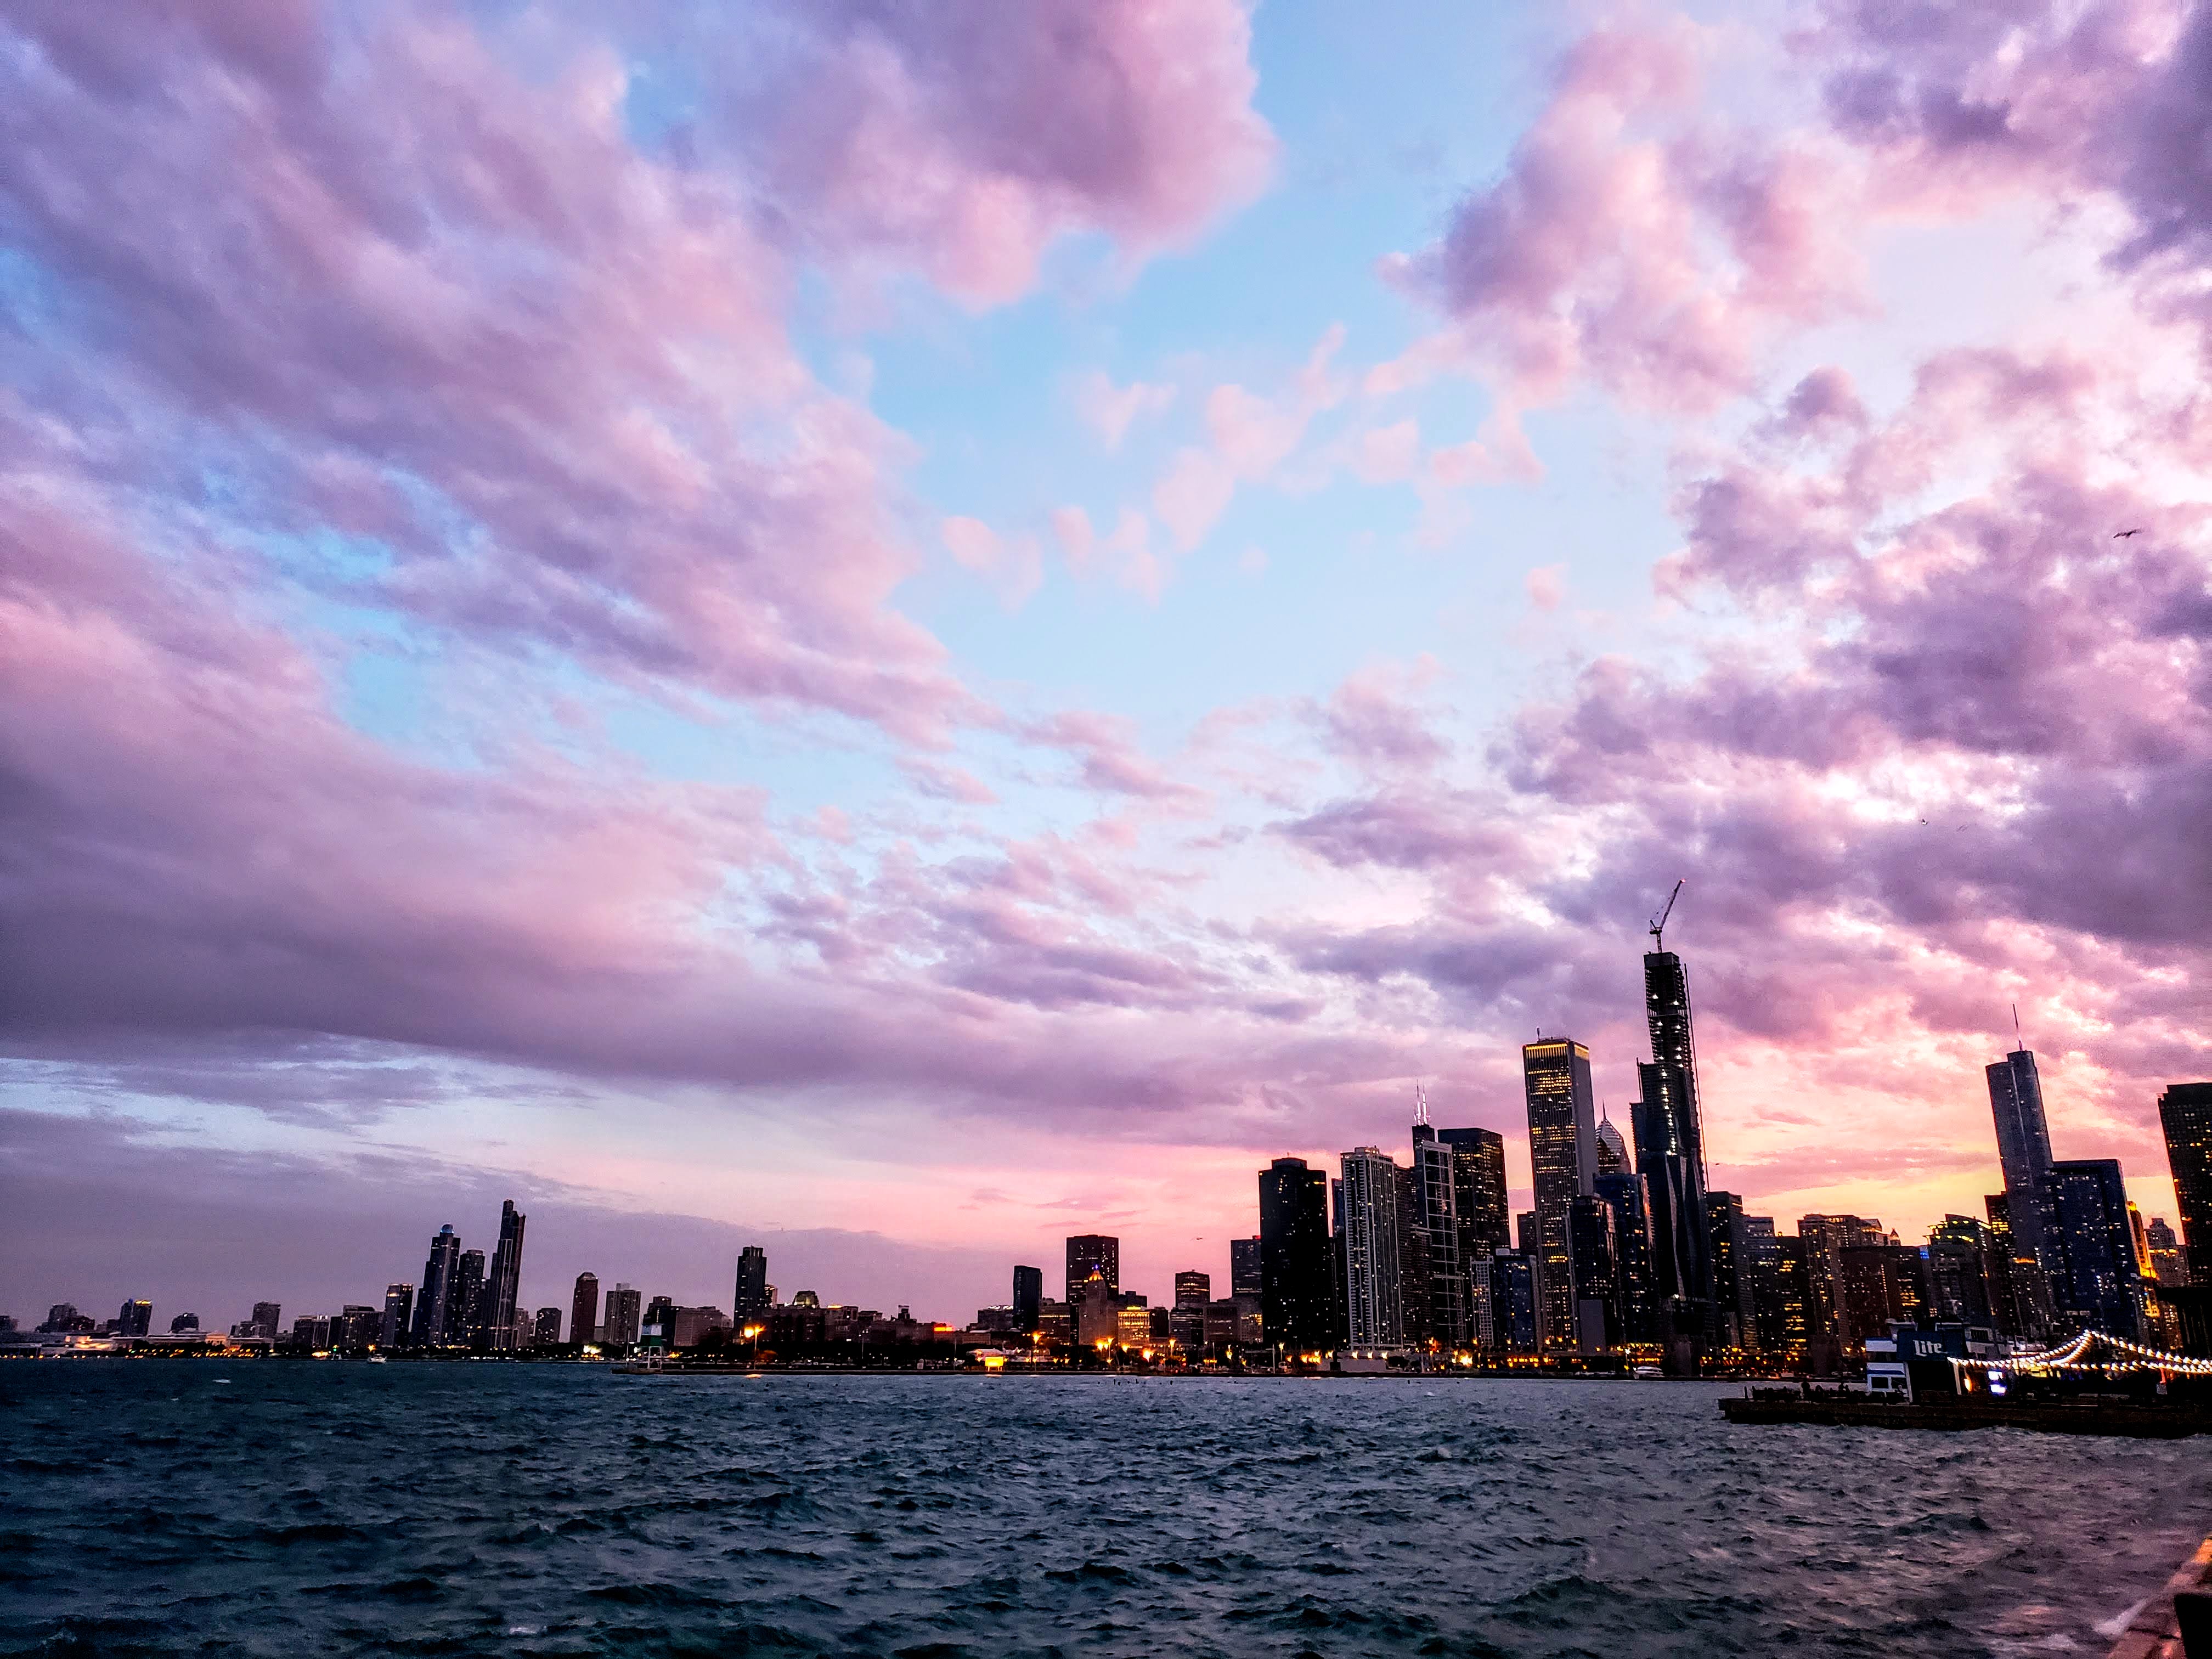 The Chicago skyline from Navy Pier